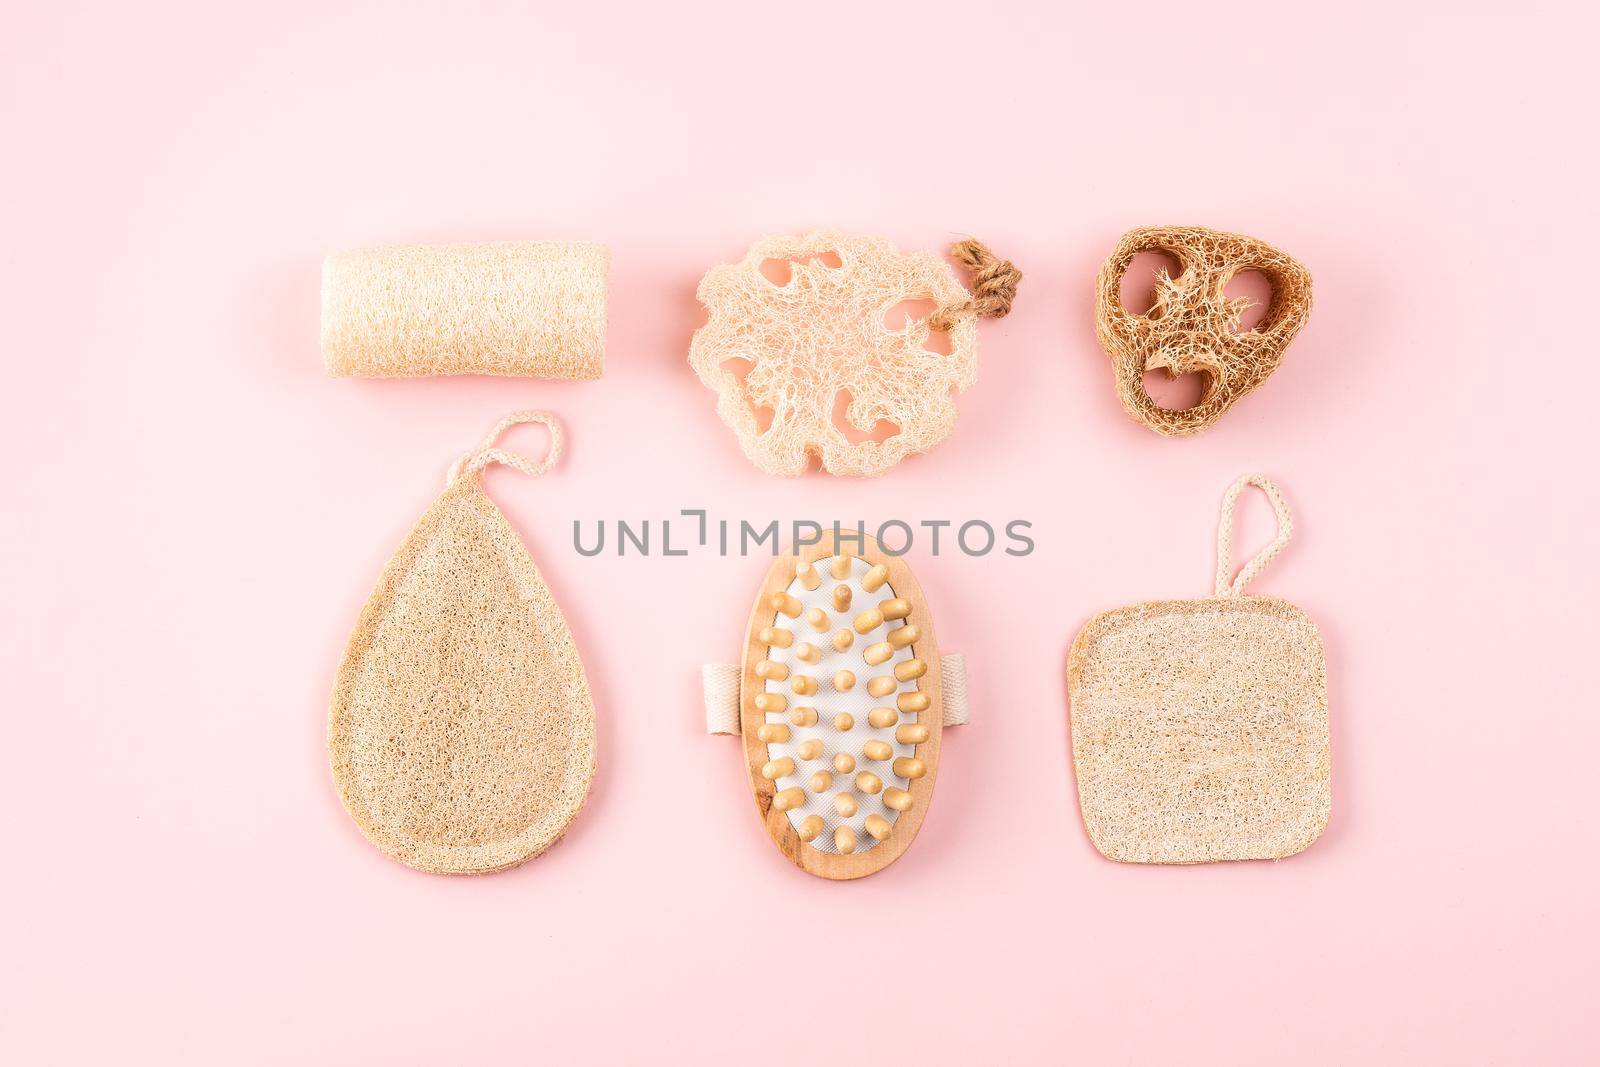 Bathroom accessories, natural loofah sponge, wooden brush on pink background. Zero waste and plastic free concept, sustainable bathroom and lifestyle. Flat lay hygiene products.